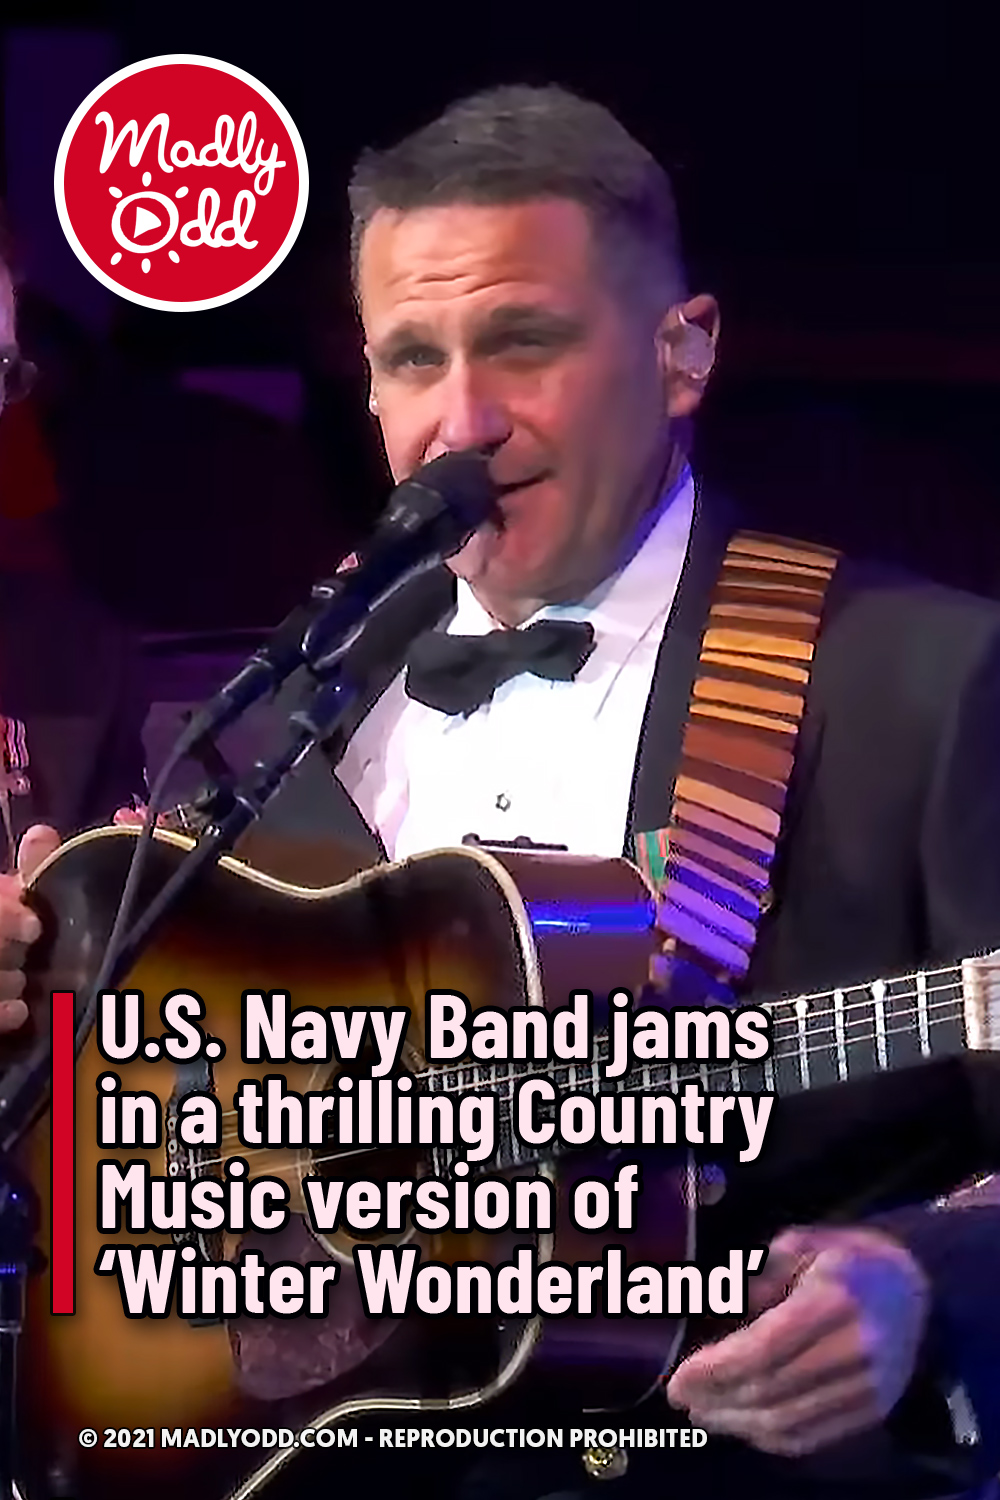 U.S. Navy Band jams in a thrilling Country Music version of ‘Winter Wonderland’